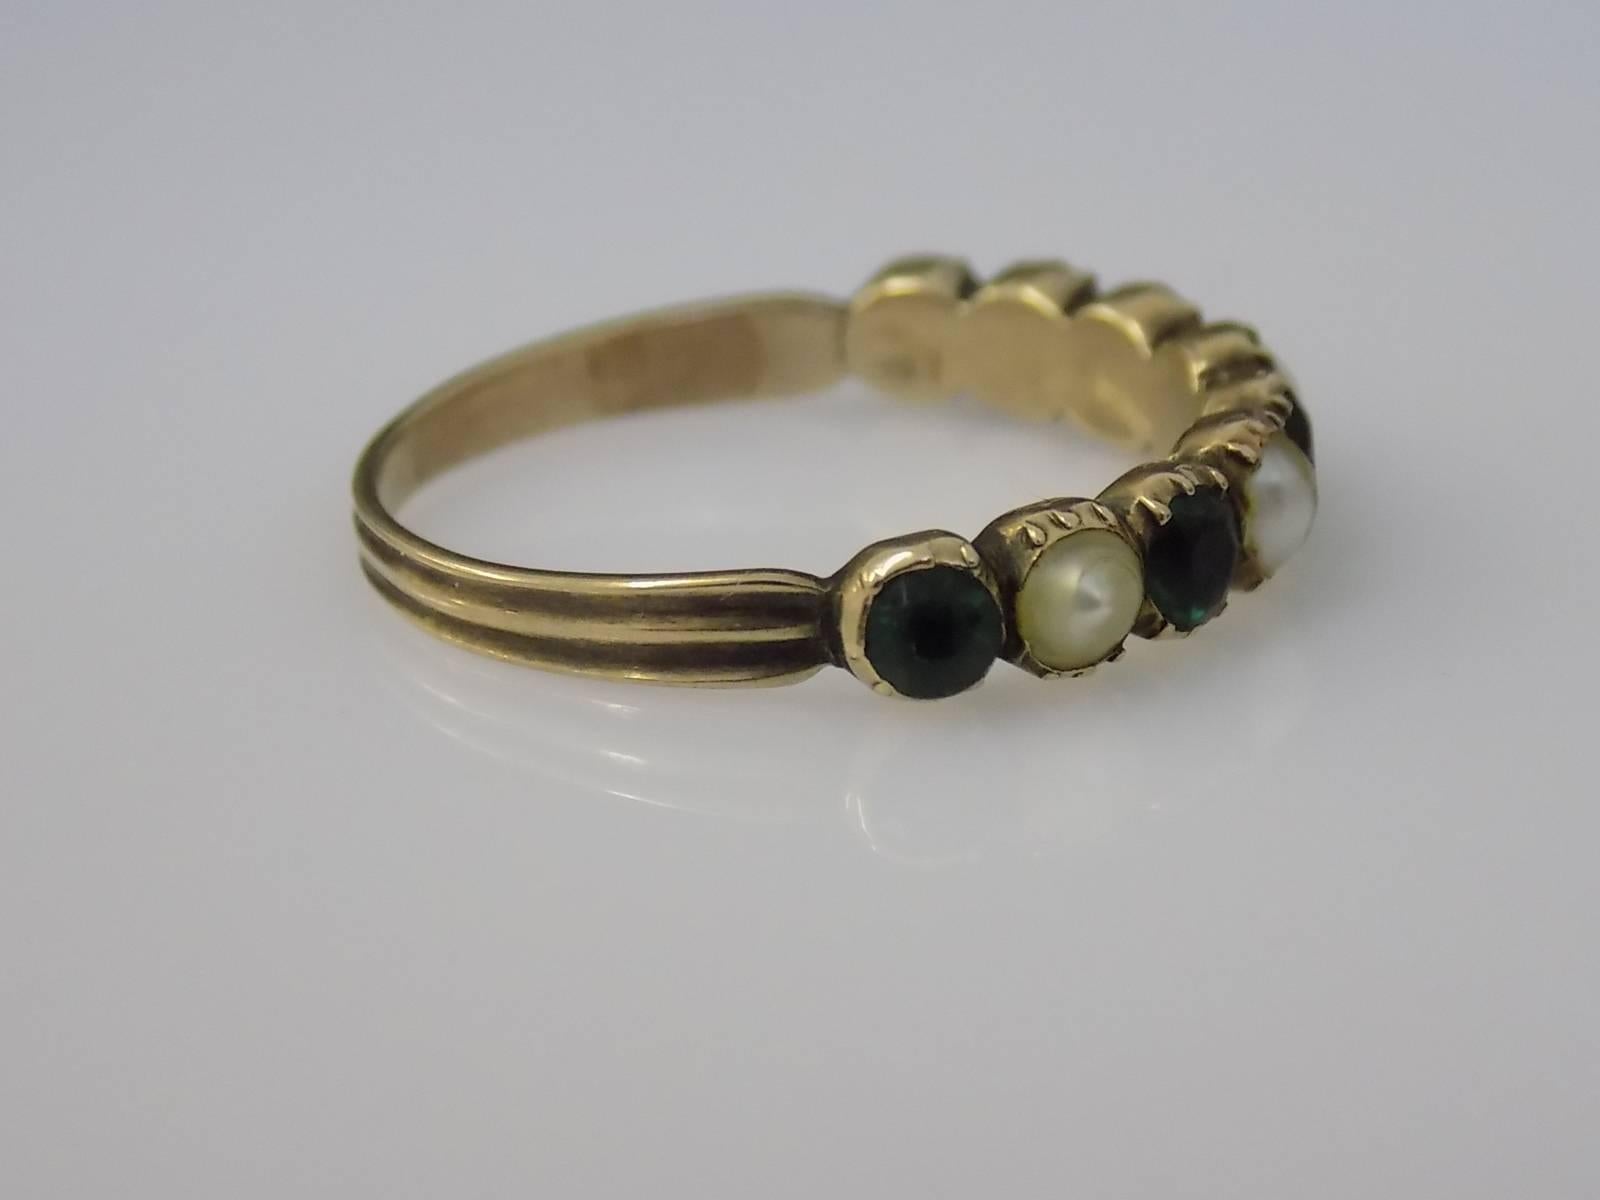 A Lovely Georgian c.1800 15 Carat Gold, Emerald colour paste and natural split Pearl ring. Slight graduated stones in close back setting. Stackable. English origin.
Size S 1/2 UK, 9.75 US.
Height of the face 4.2mm.
Unmarked, tested 15 carat gold.